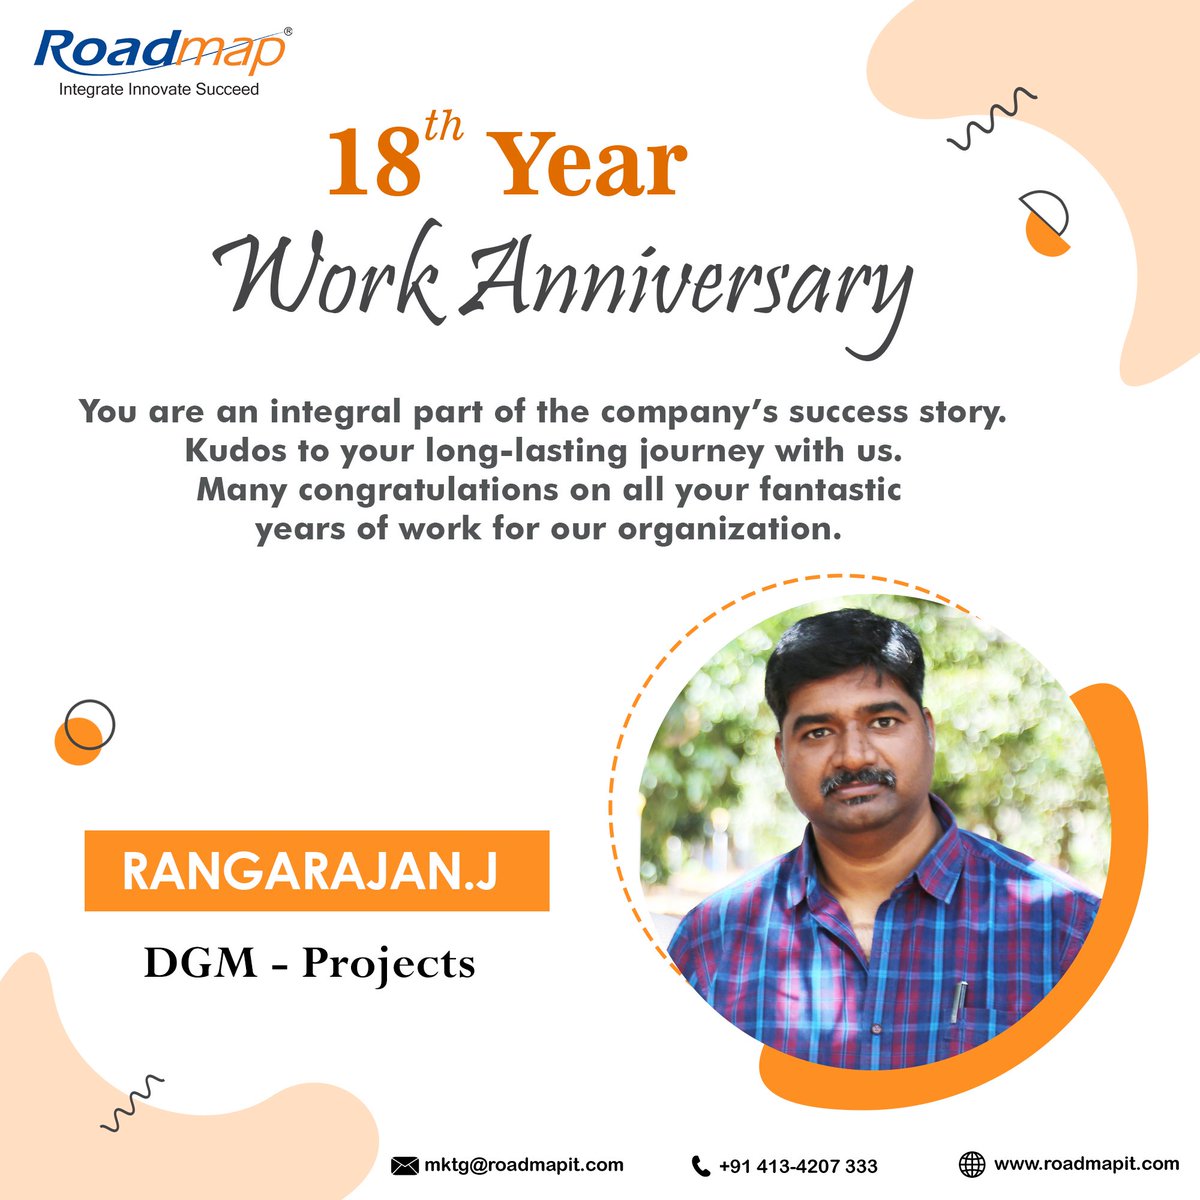 On your special day, Roadmap applauds and appreciates the years of dedication, time, and effort you have put into this organization.

#work #workanniversary #happyworkanniversary #celebration #team #ourteam #anniversary #workhappyanniversary #congratulations  #celebration